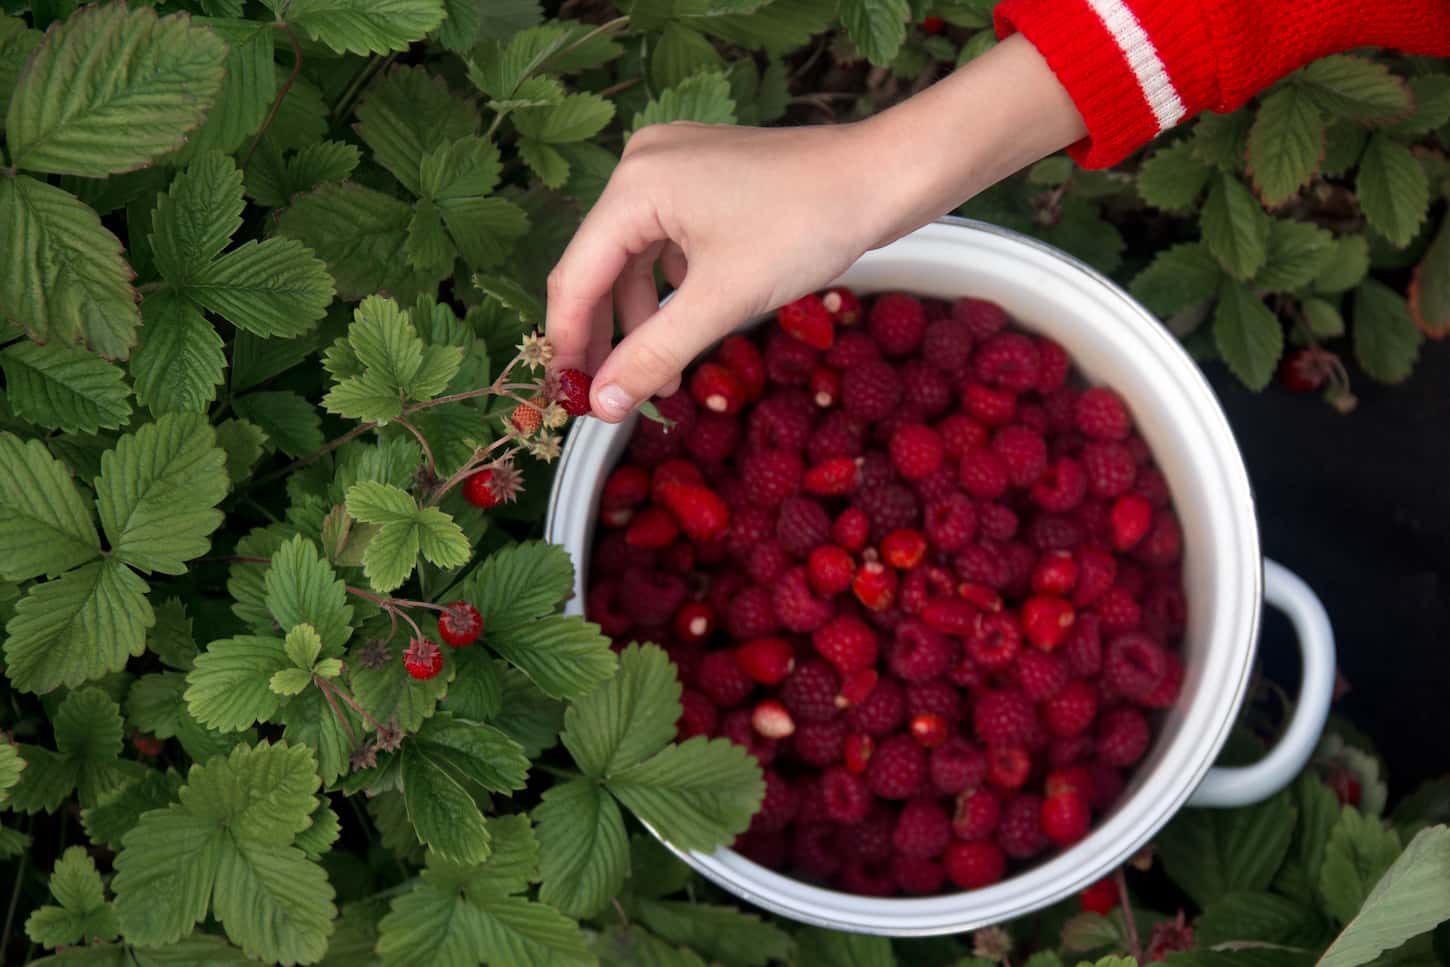 An image of female hand-picking fresh raspberries and putting them in a white bowl.